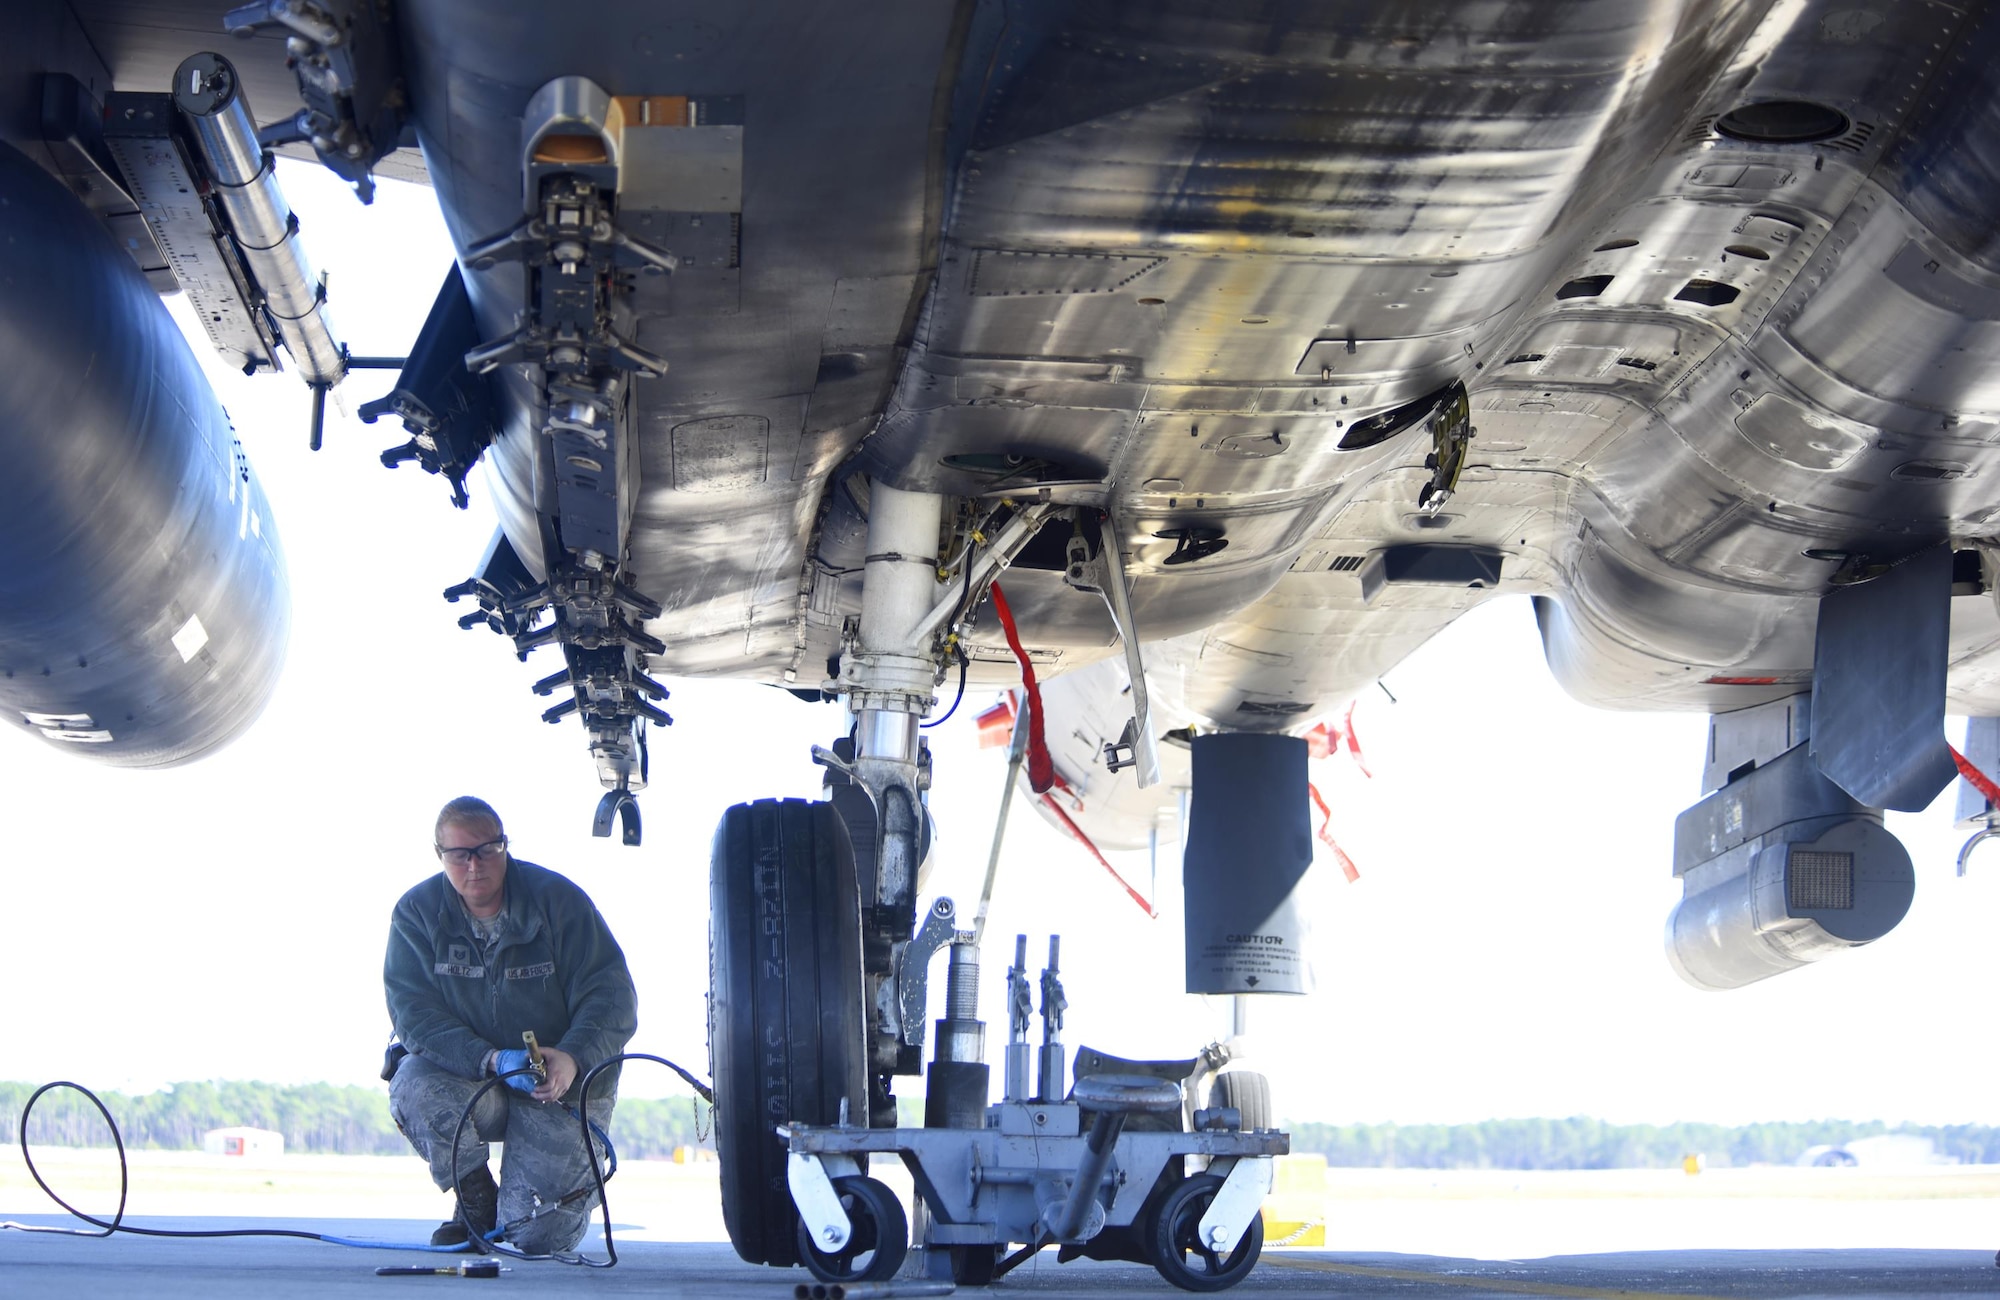 U.S. Air Force Tech. Sgt. Tessa Holtz, 33th Aircraft Maintenance Squadron from Mountain Home Air Force Base, Idaho, checks the tire pressure of an F-15 E Strike Eagle prior to a training sortie during Checkered Flag 17-1 at Tyndall Air Force Base, Fla., Dec. 14, 2016. During the exercise, Tyndall AFB, Mountain Home AFB and their partners brought together more than 90 aircraft to take part in the two week-long exercise. (U.S. Air Force photo by Senior Airman Solomon Cook/Released)